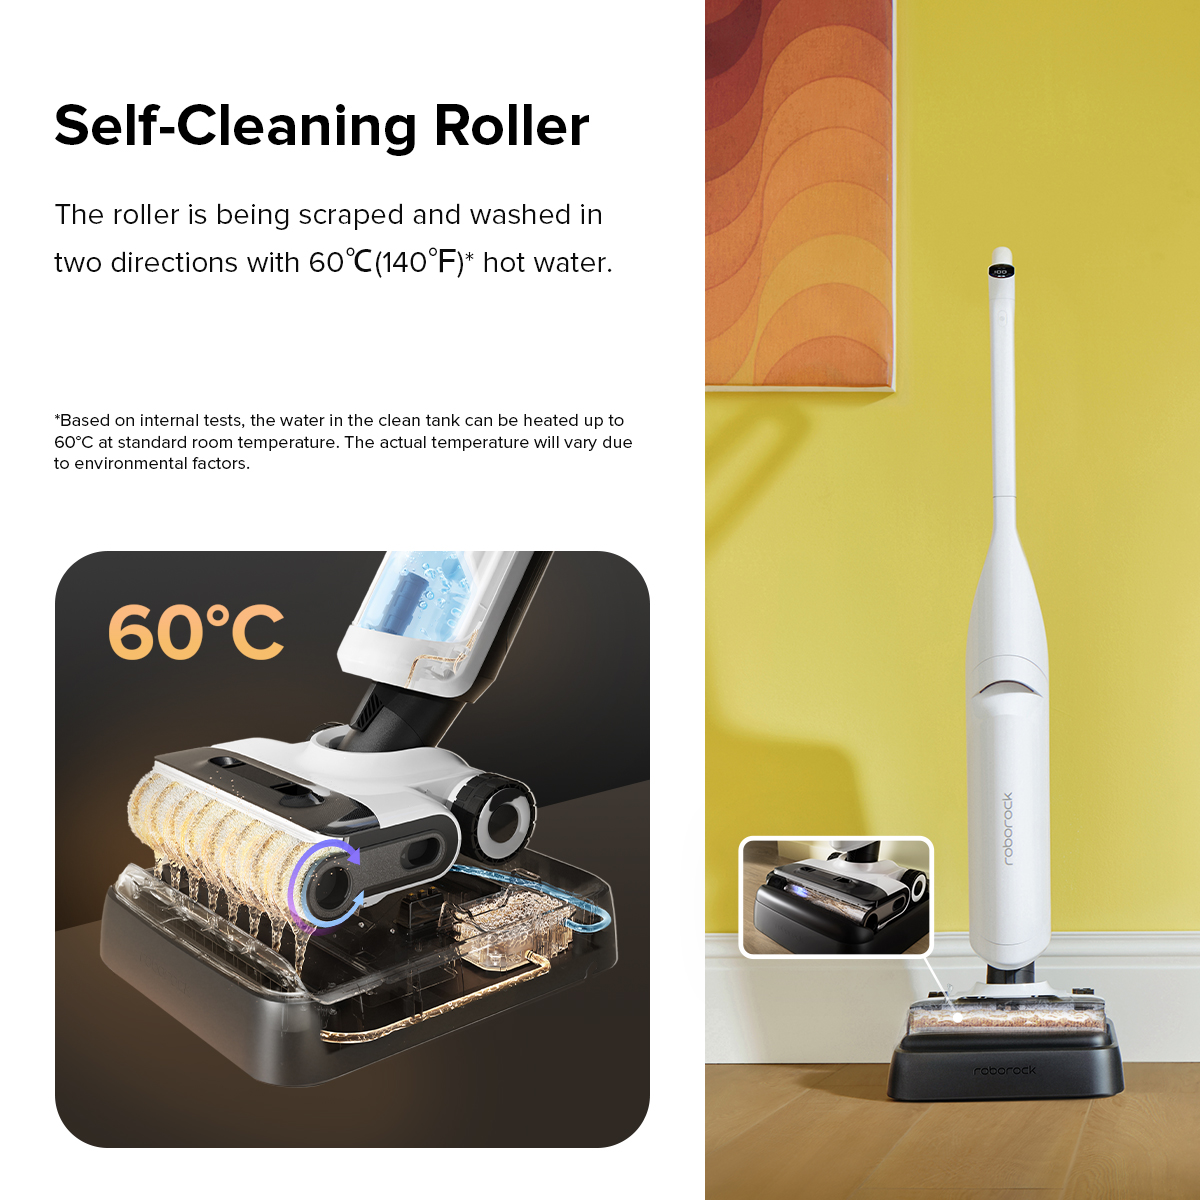 Discover the power of clean with Flexi Pro! 💪 Here's why it's your ultimate cleaning companion: Ready for the ultimate clean? bit.ly/4bpb5Tq #FlexiSeries #FlexiPro #FlexiLite #Roborock #RobotVacuum #WetDryVacuum #RockingLifeWithU #SmartCleaning #HandsfreeExperience